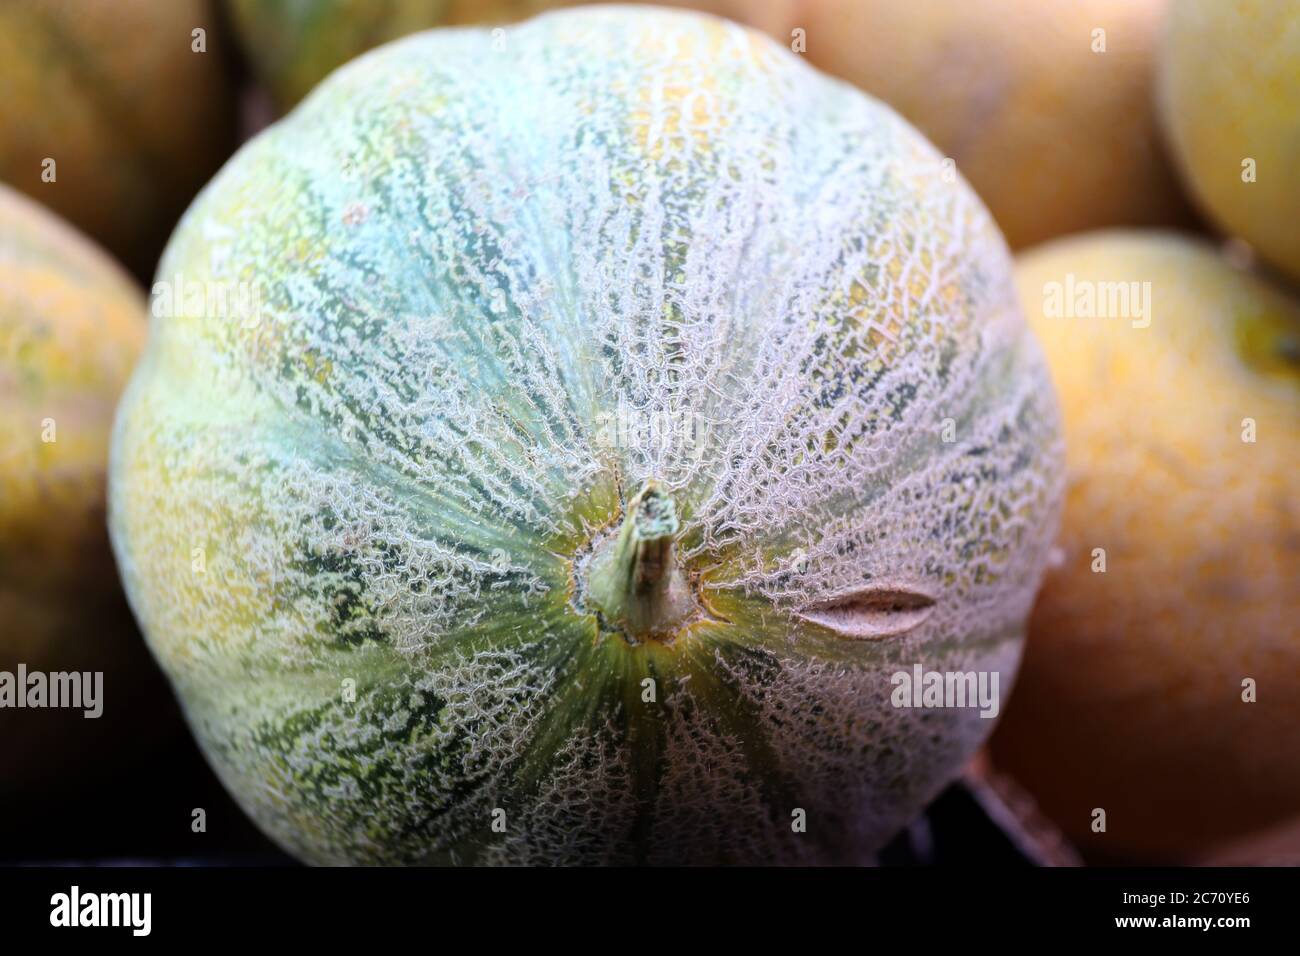 Close up of melons. Texture of melon peel. Stock Photo